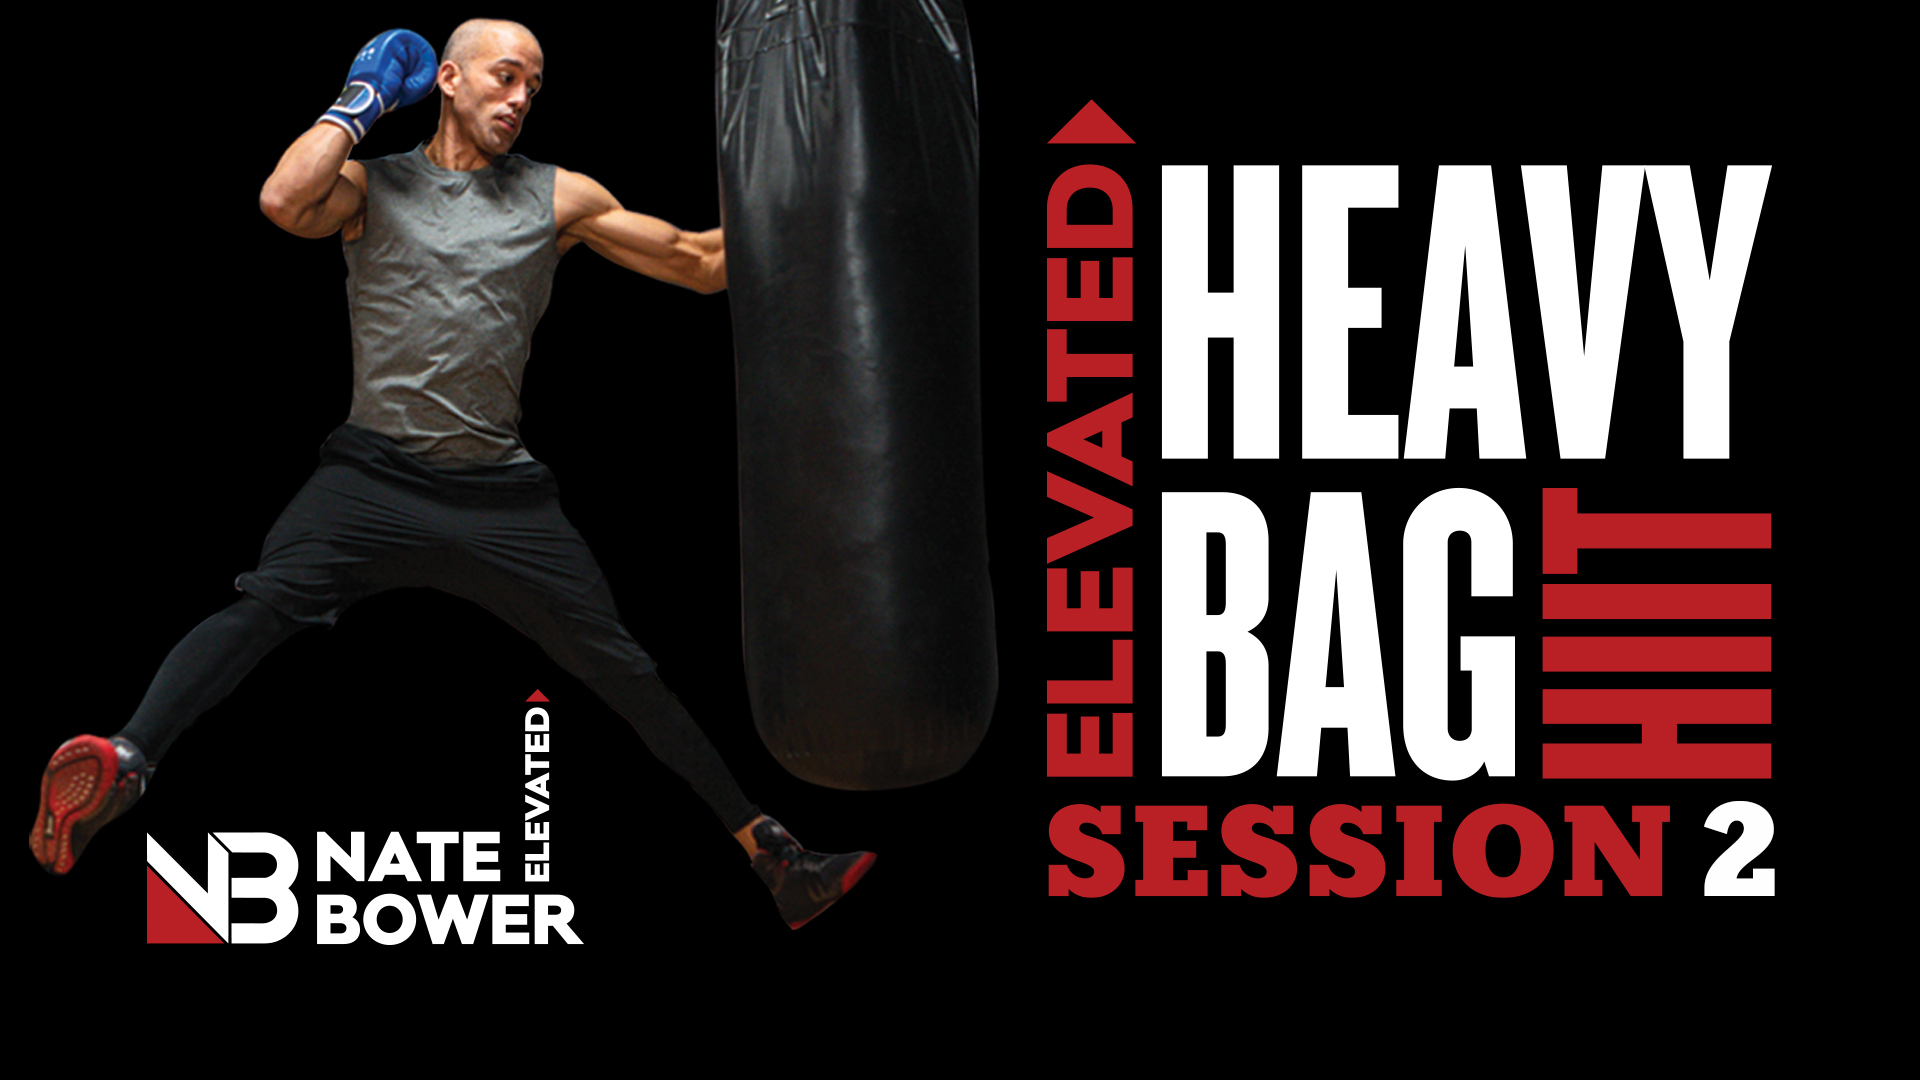 10 Punching Bag Drills For Beginners - 30-Minute Heavy Bag Workout